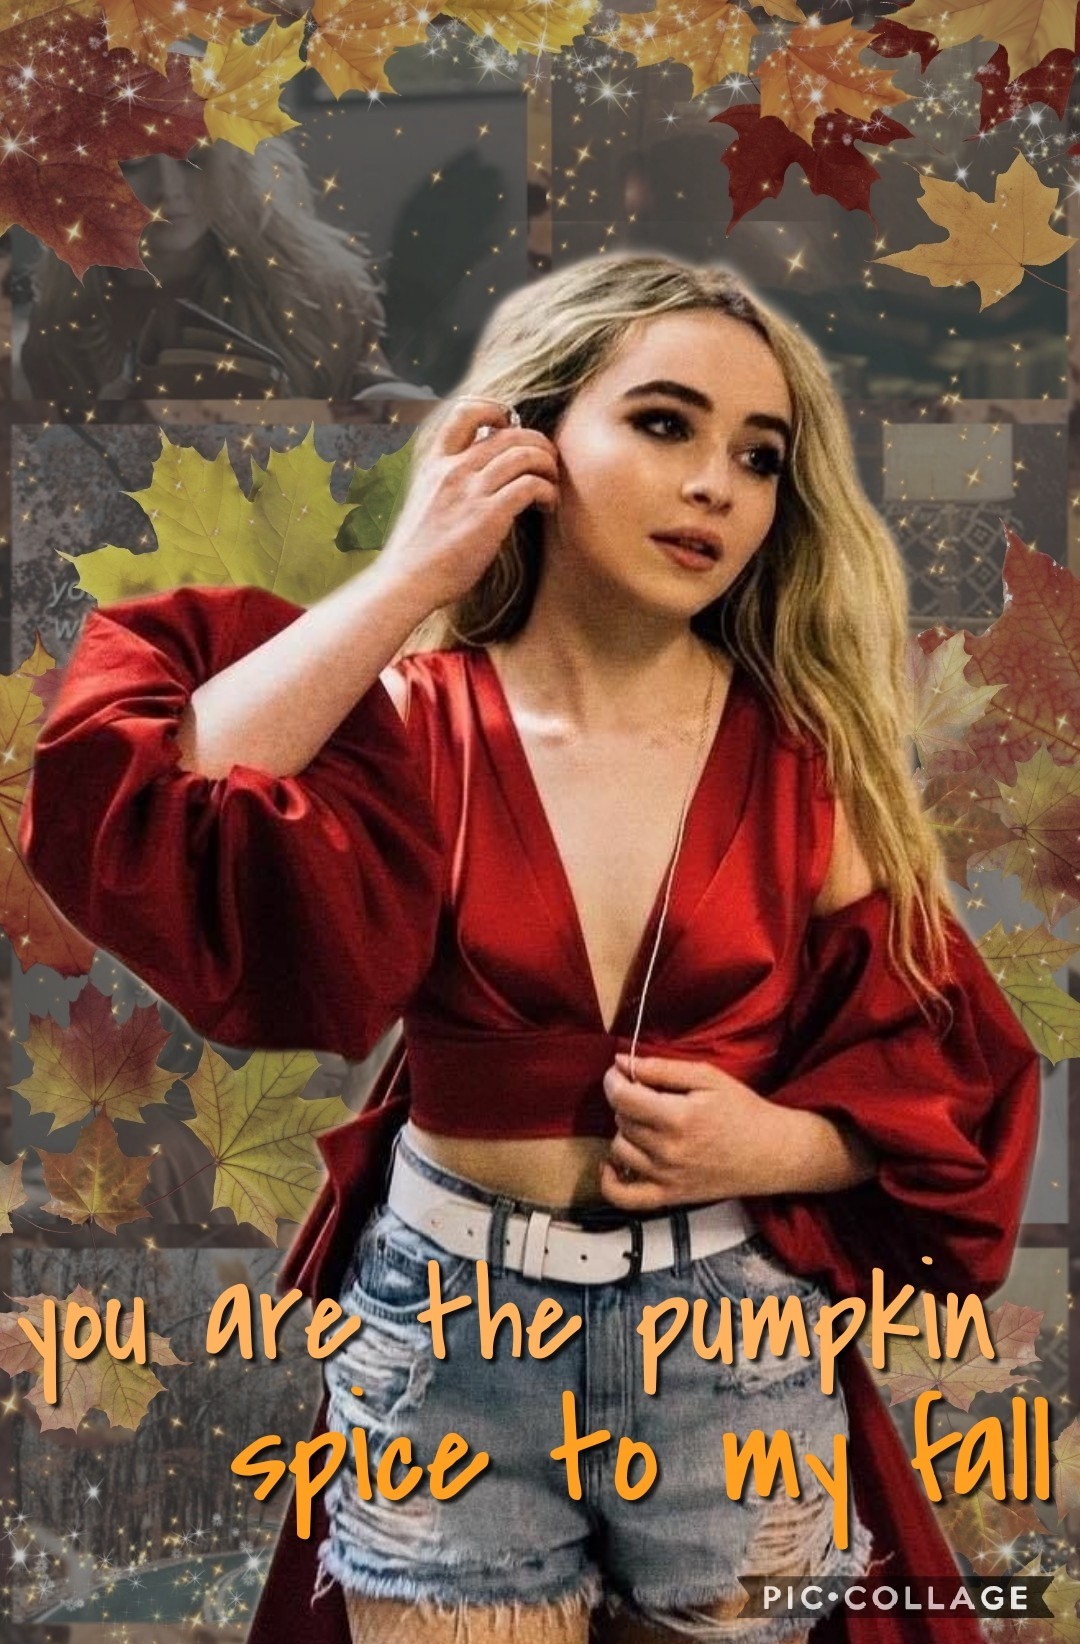 so I continued adding stuff to the sabrina edit and this is the final result